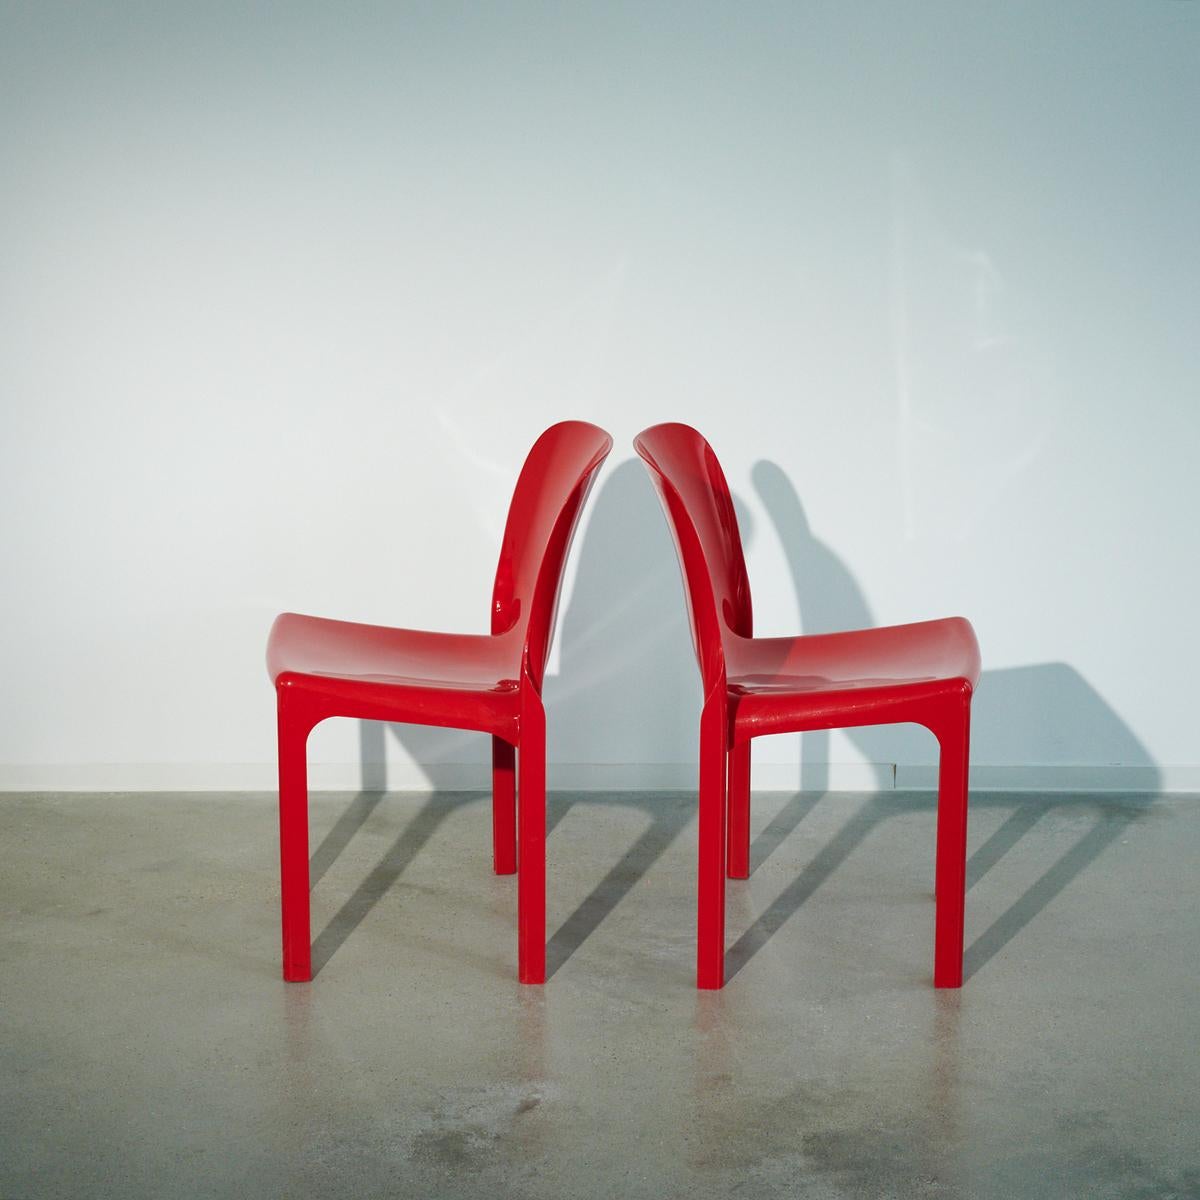 Pair of ‘Selene’ chairs in plastic by Vico Magistretti, 1968

The selene chair was designed by Vico Magistretti for Artemide in 1968.

Additional information: 
Material: Plastic
Designer: Vico Magistretti
Size: 52 W X 48 D x 75 H cm.